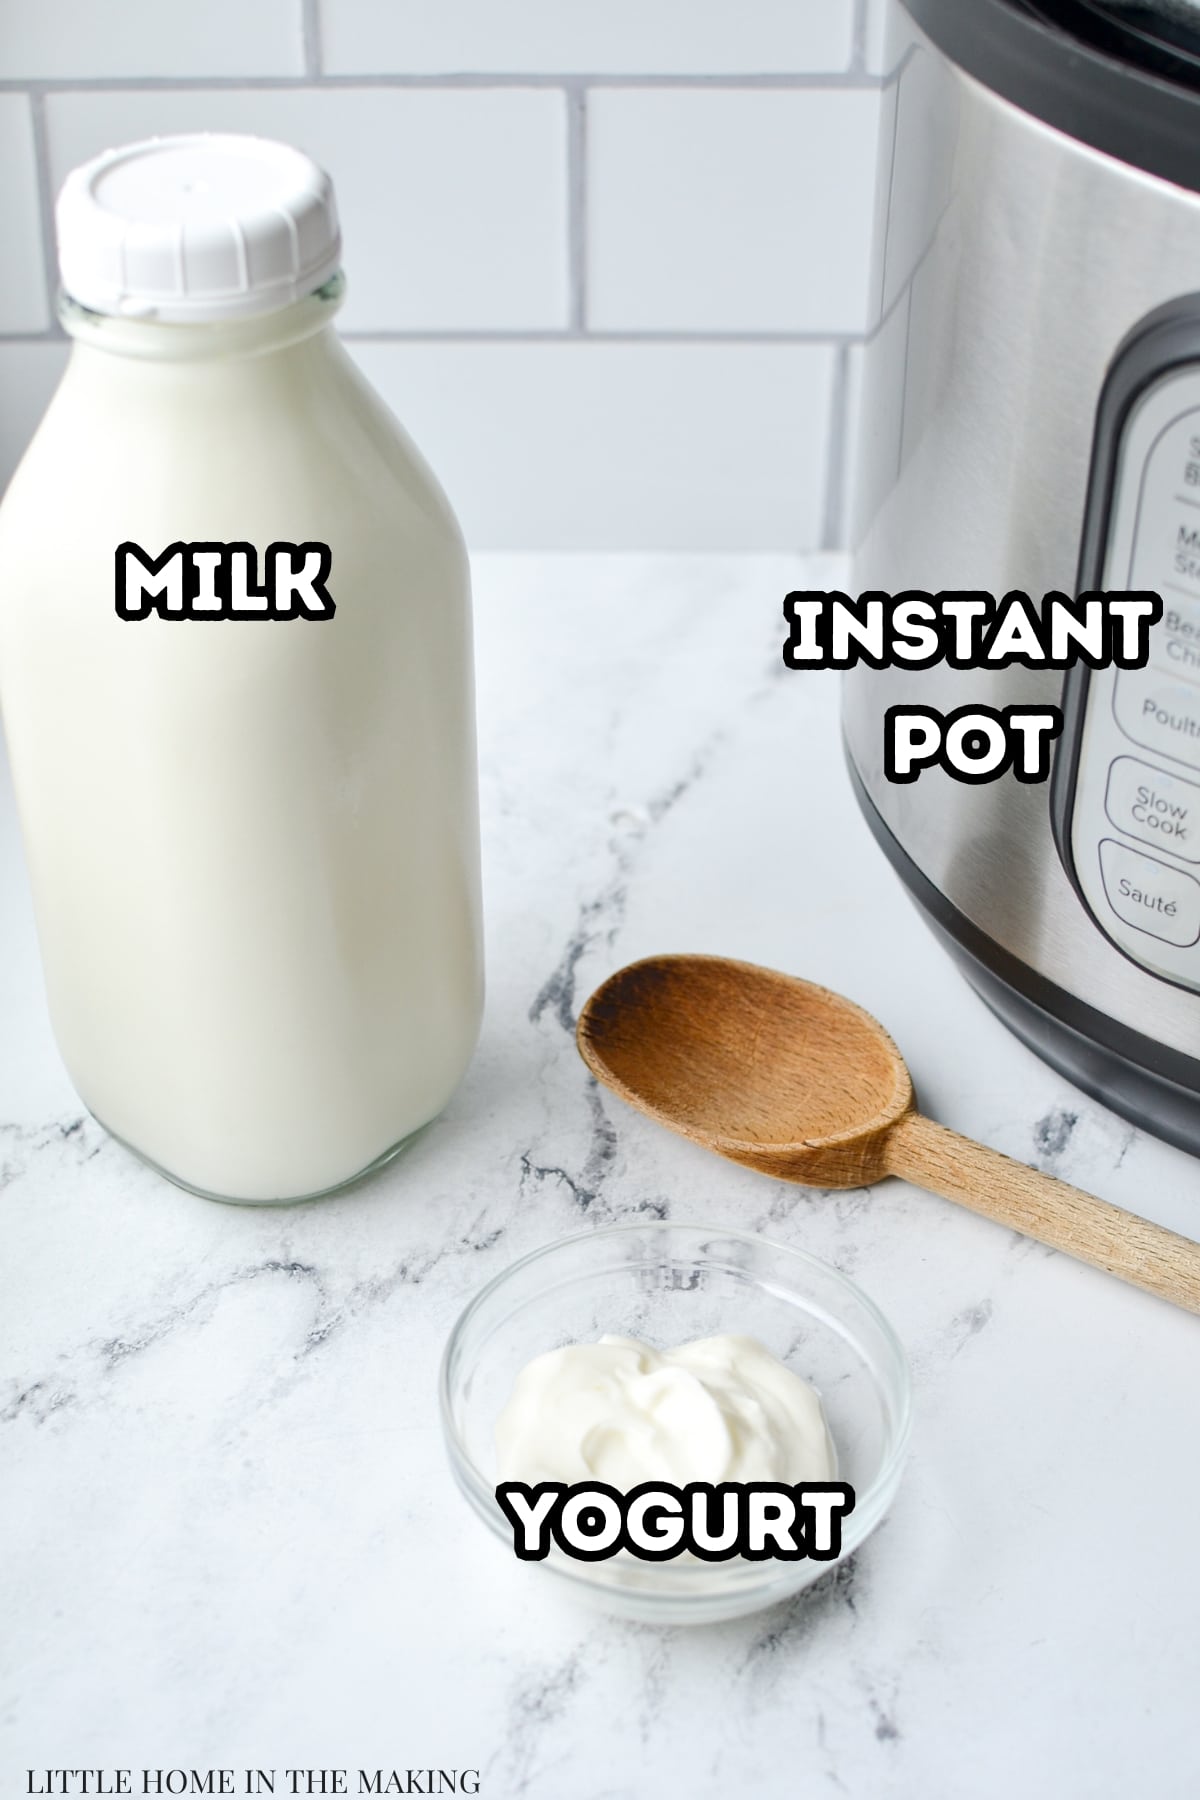 A jug of milk, some yogurt in a bowl, and an Instant Pot in the background.